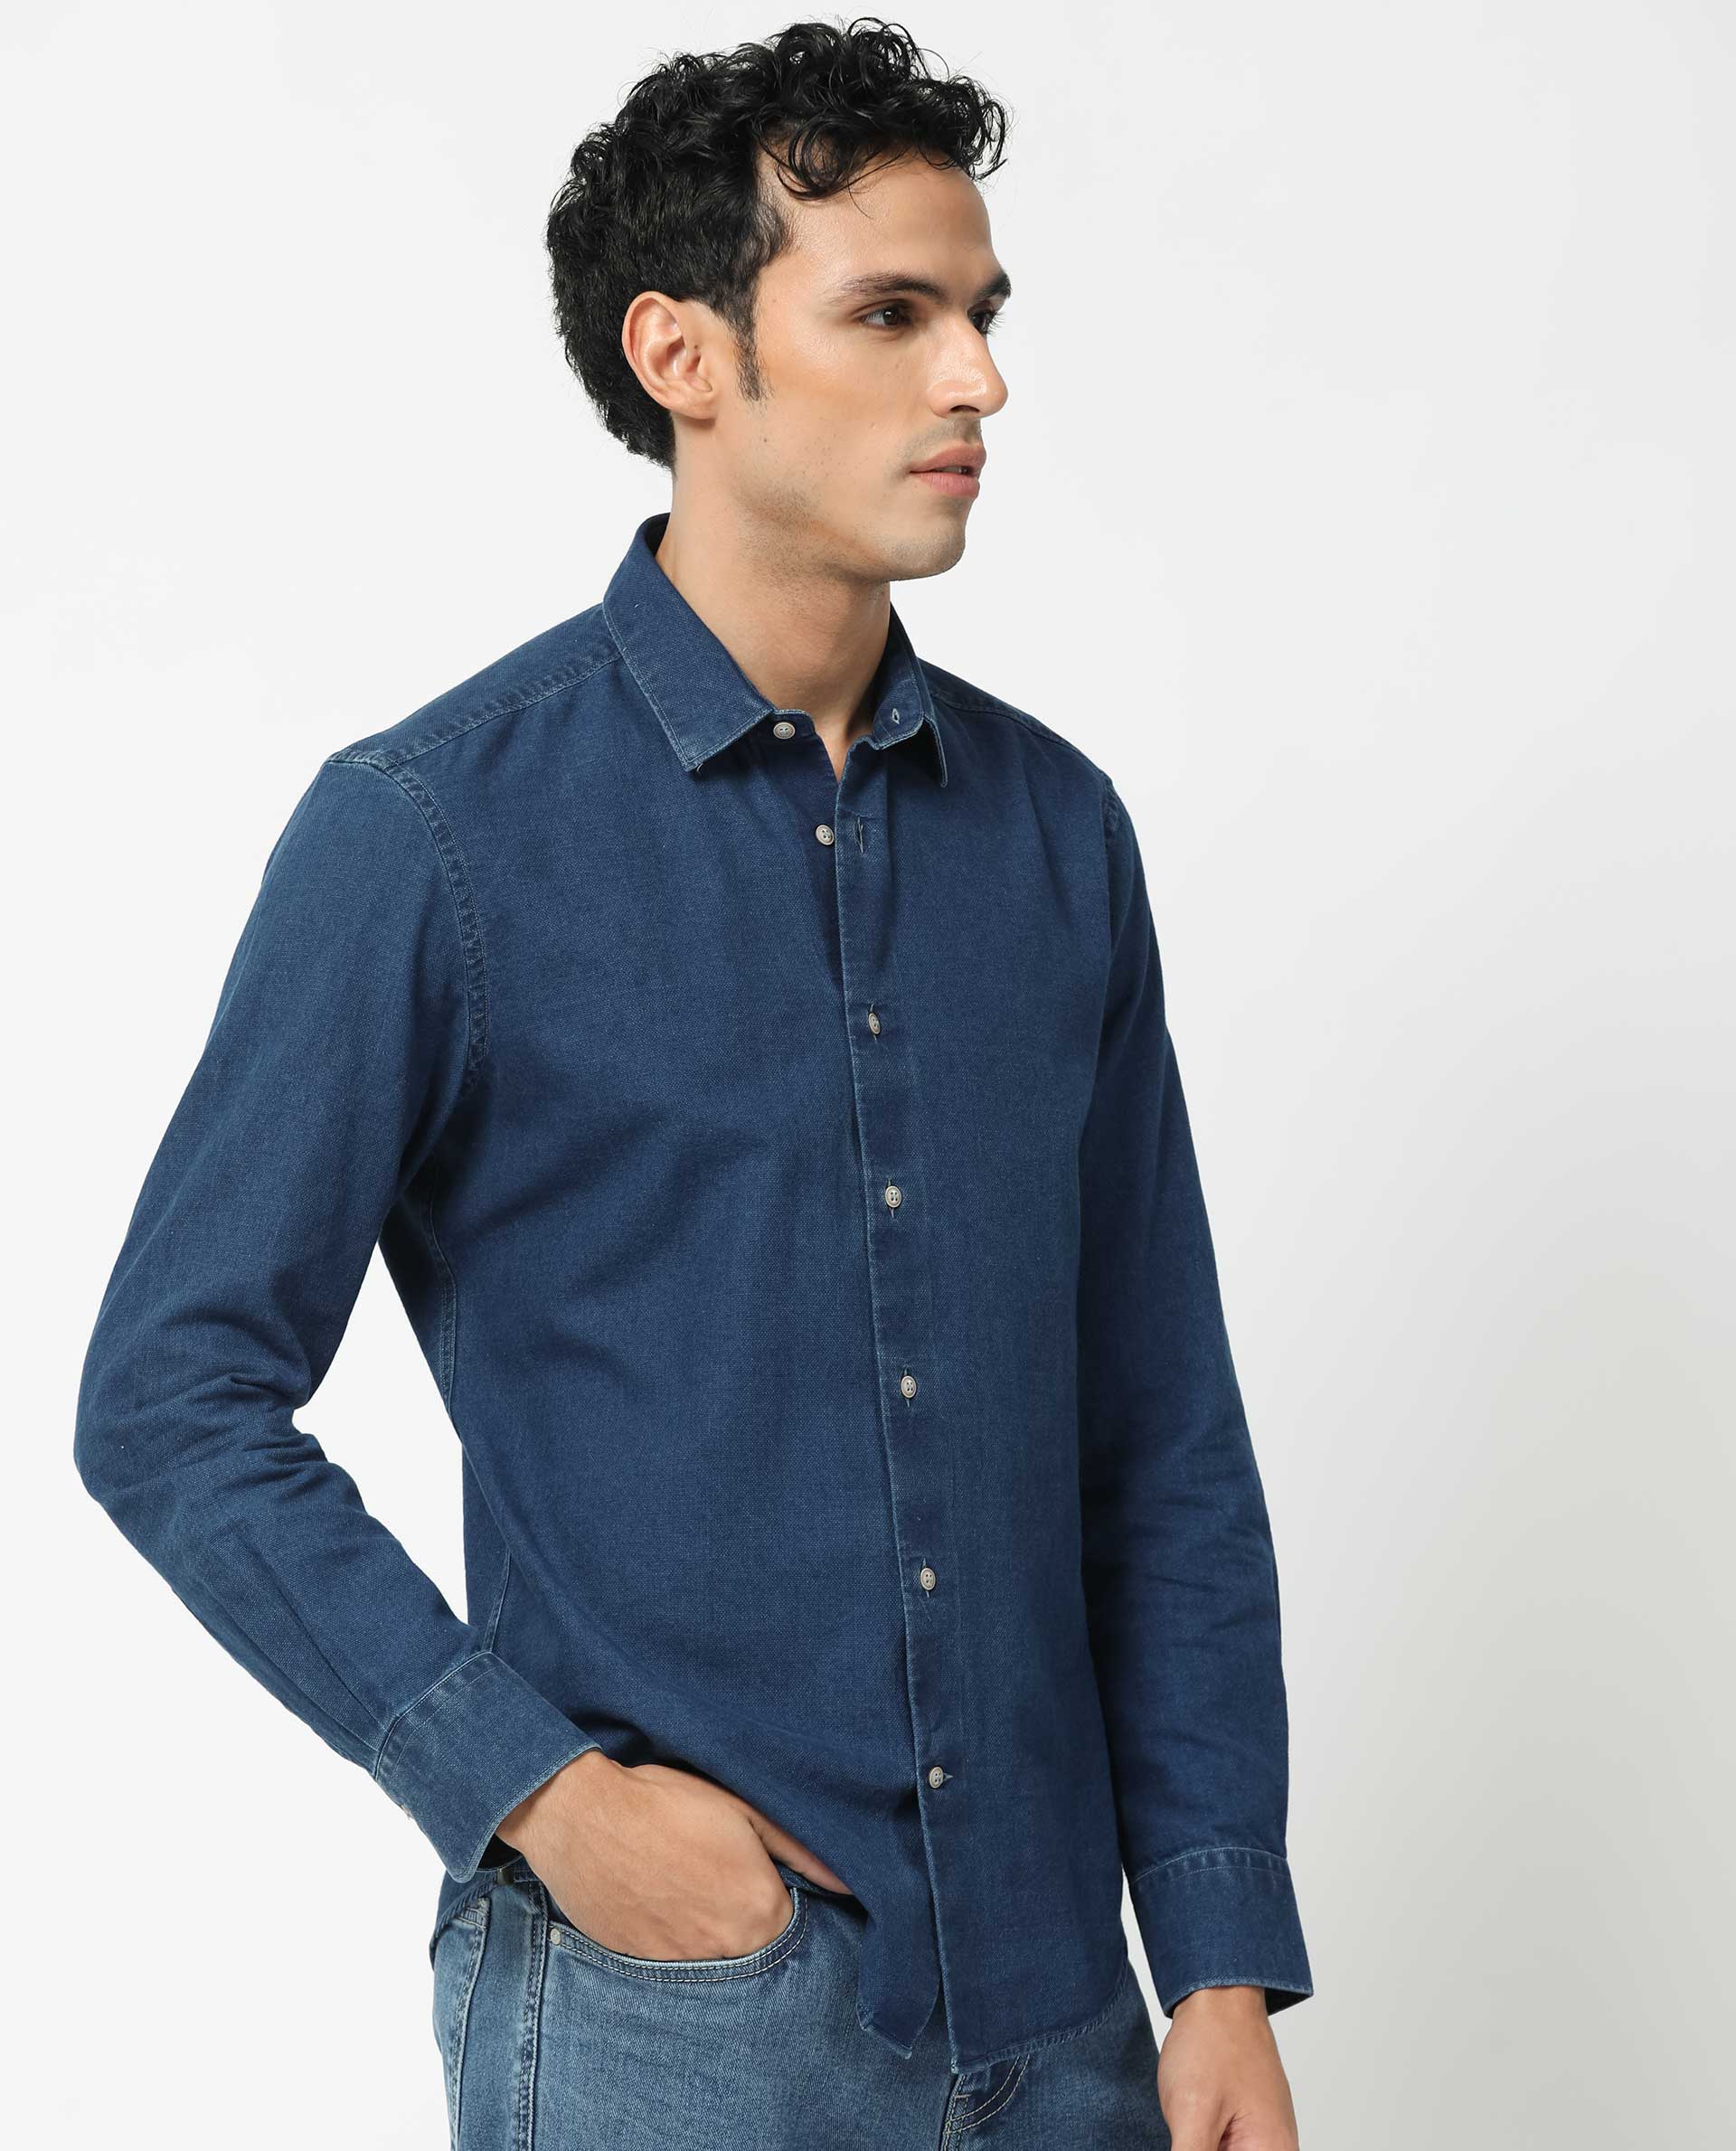 Oxford Shirt in Light Blue | 7 For All Mankind